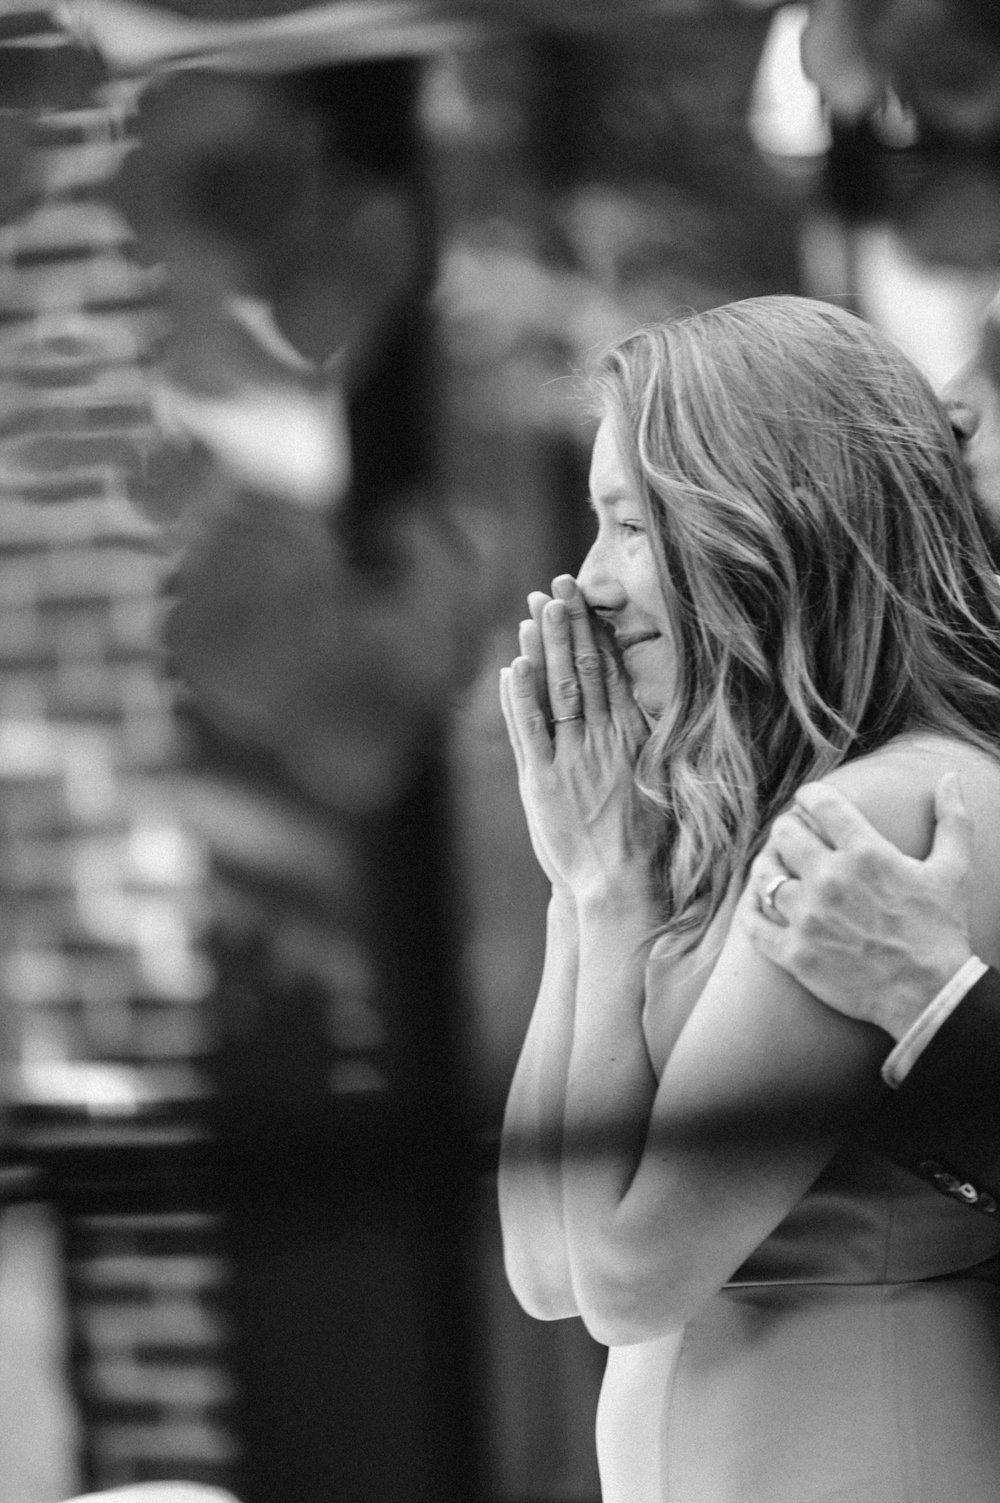 emotive photo woman watching bride dance with groom with her hands up to her face smiling